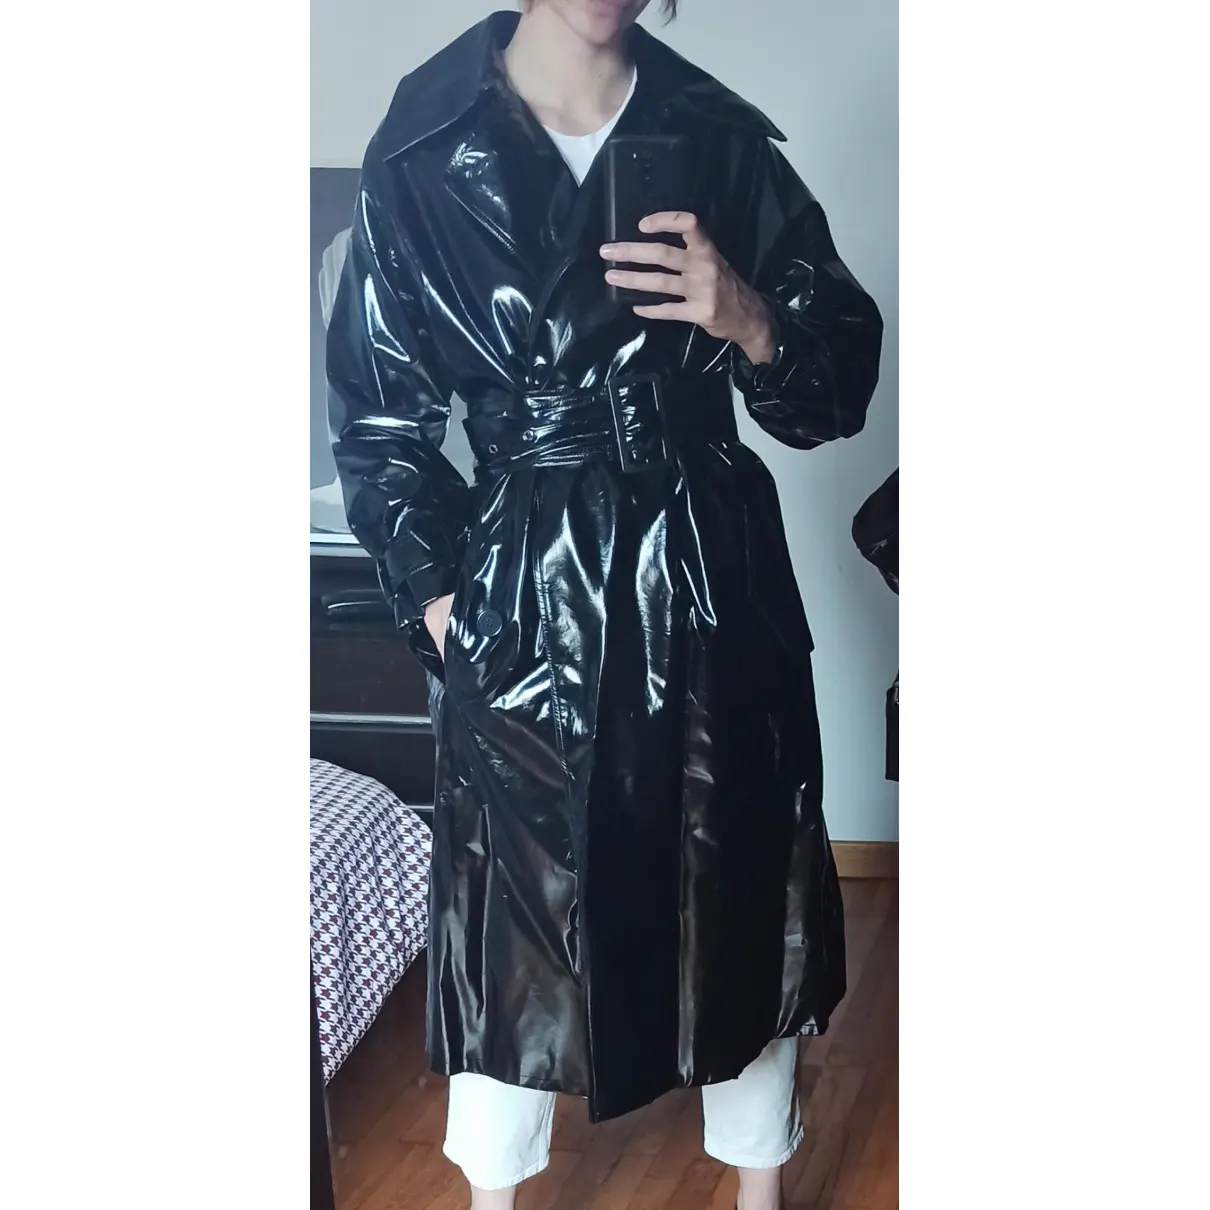 Patent leather trench coat Weili Zheng